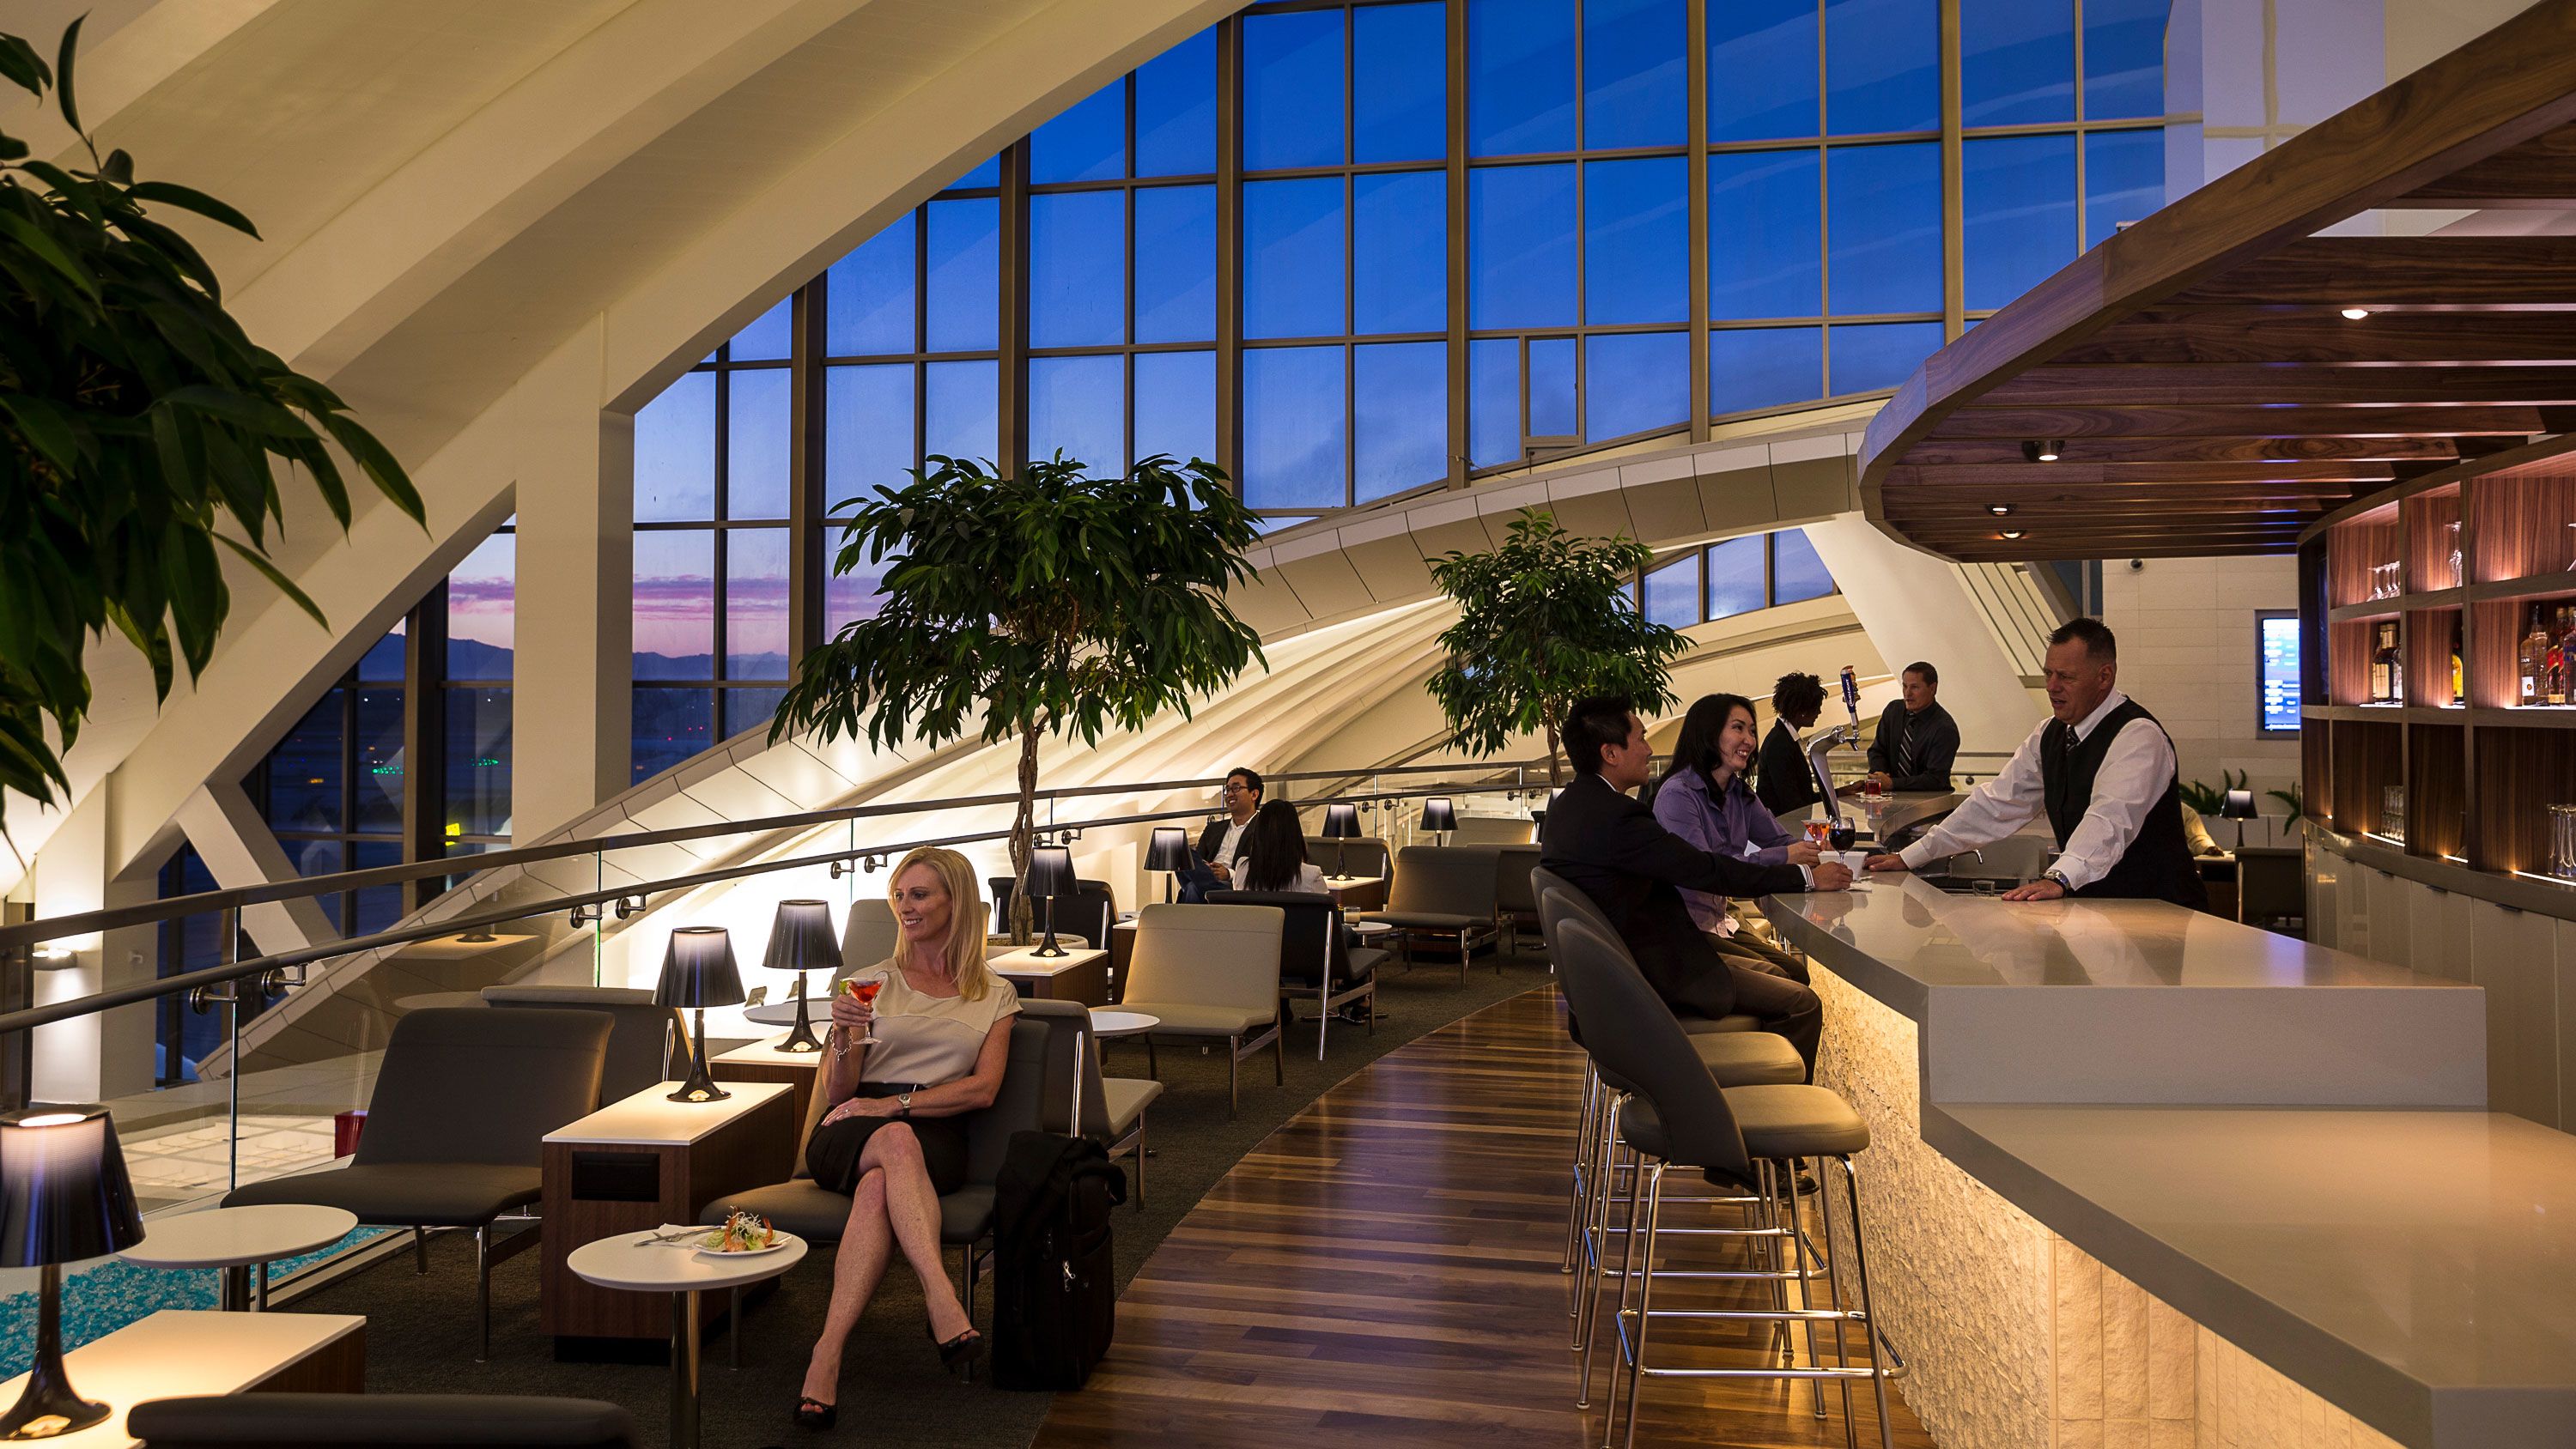 How to design an airport lounge